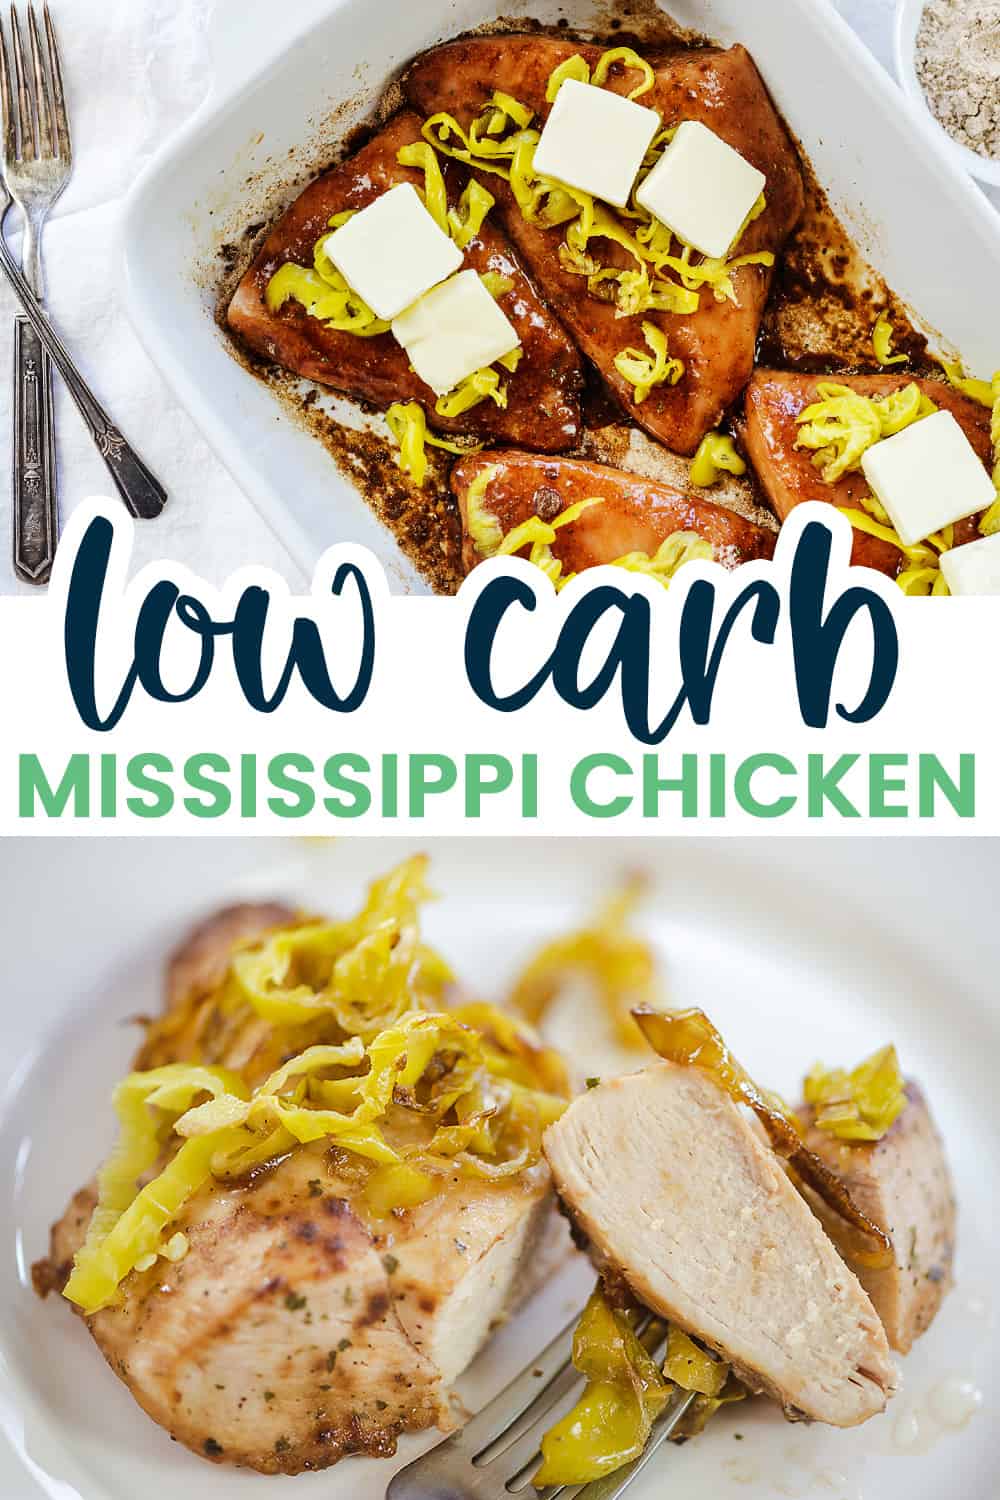 Baked Mississippi Chicken That Low Carb Life